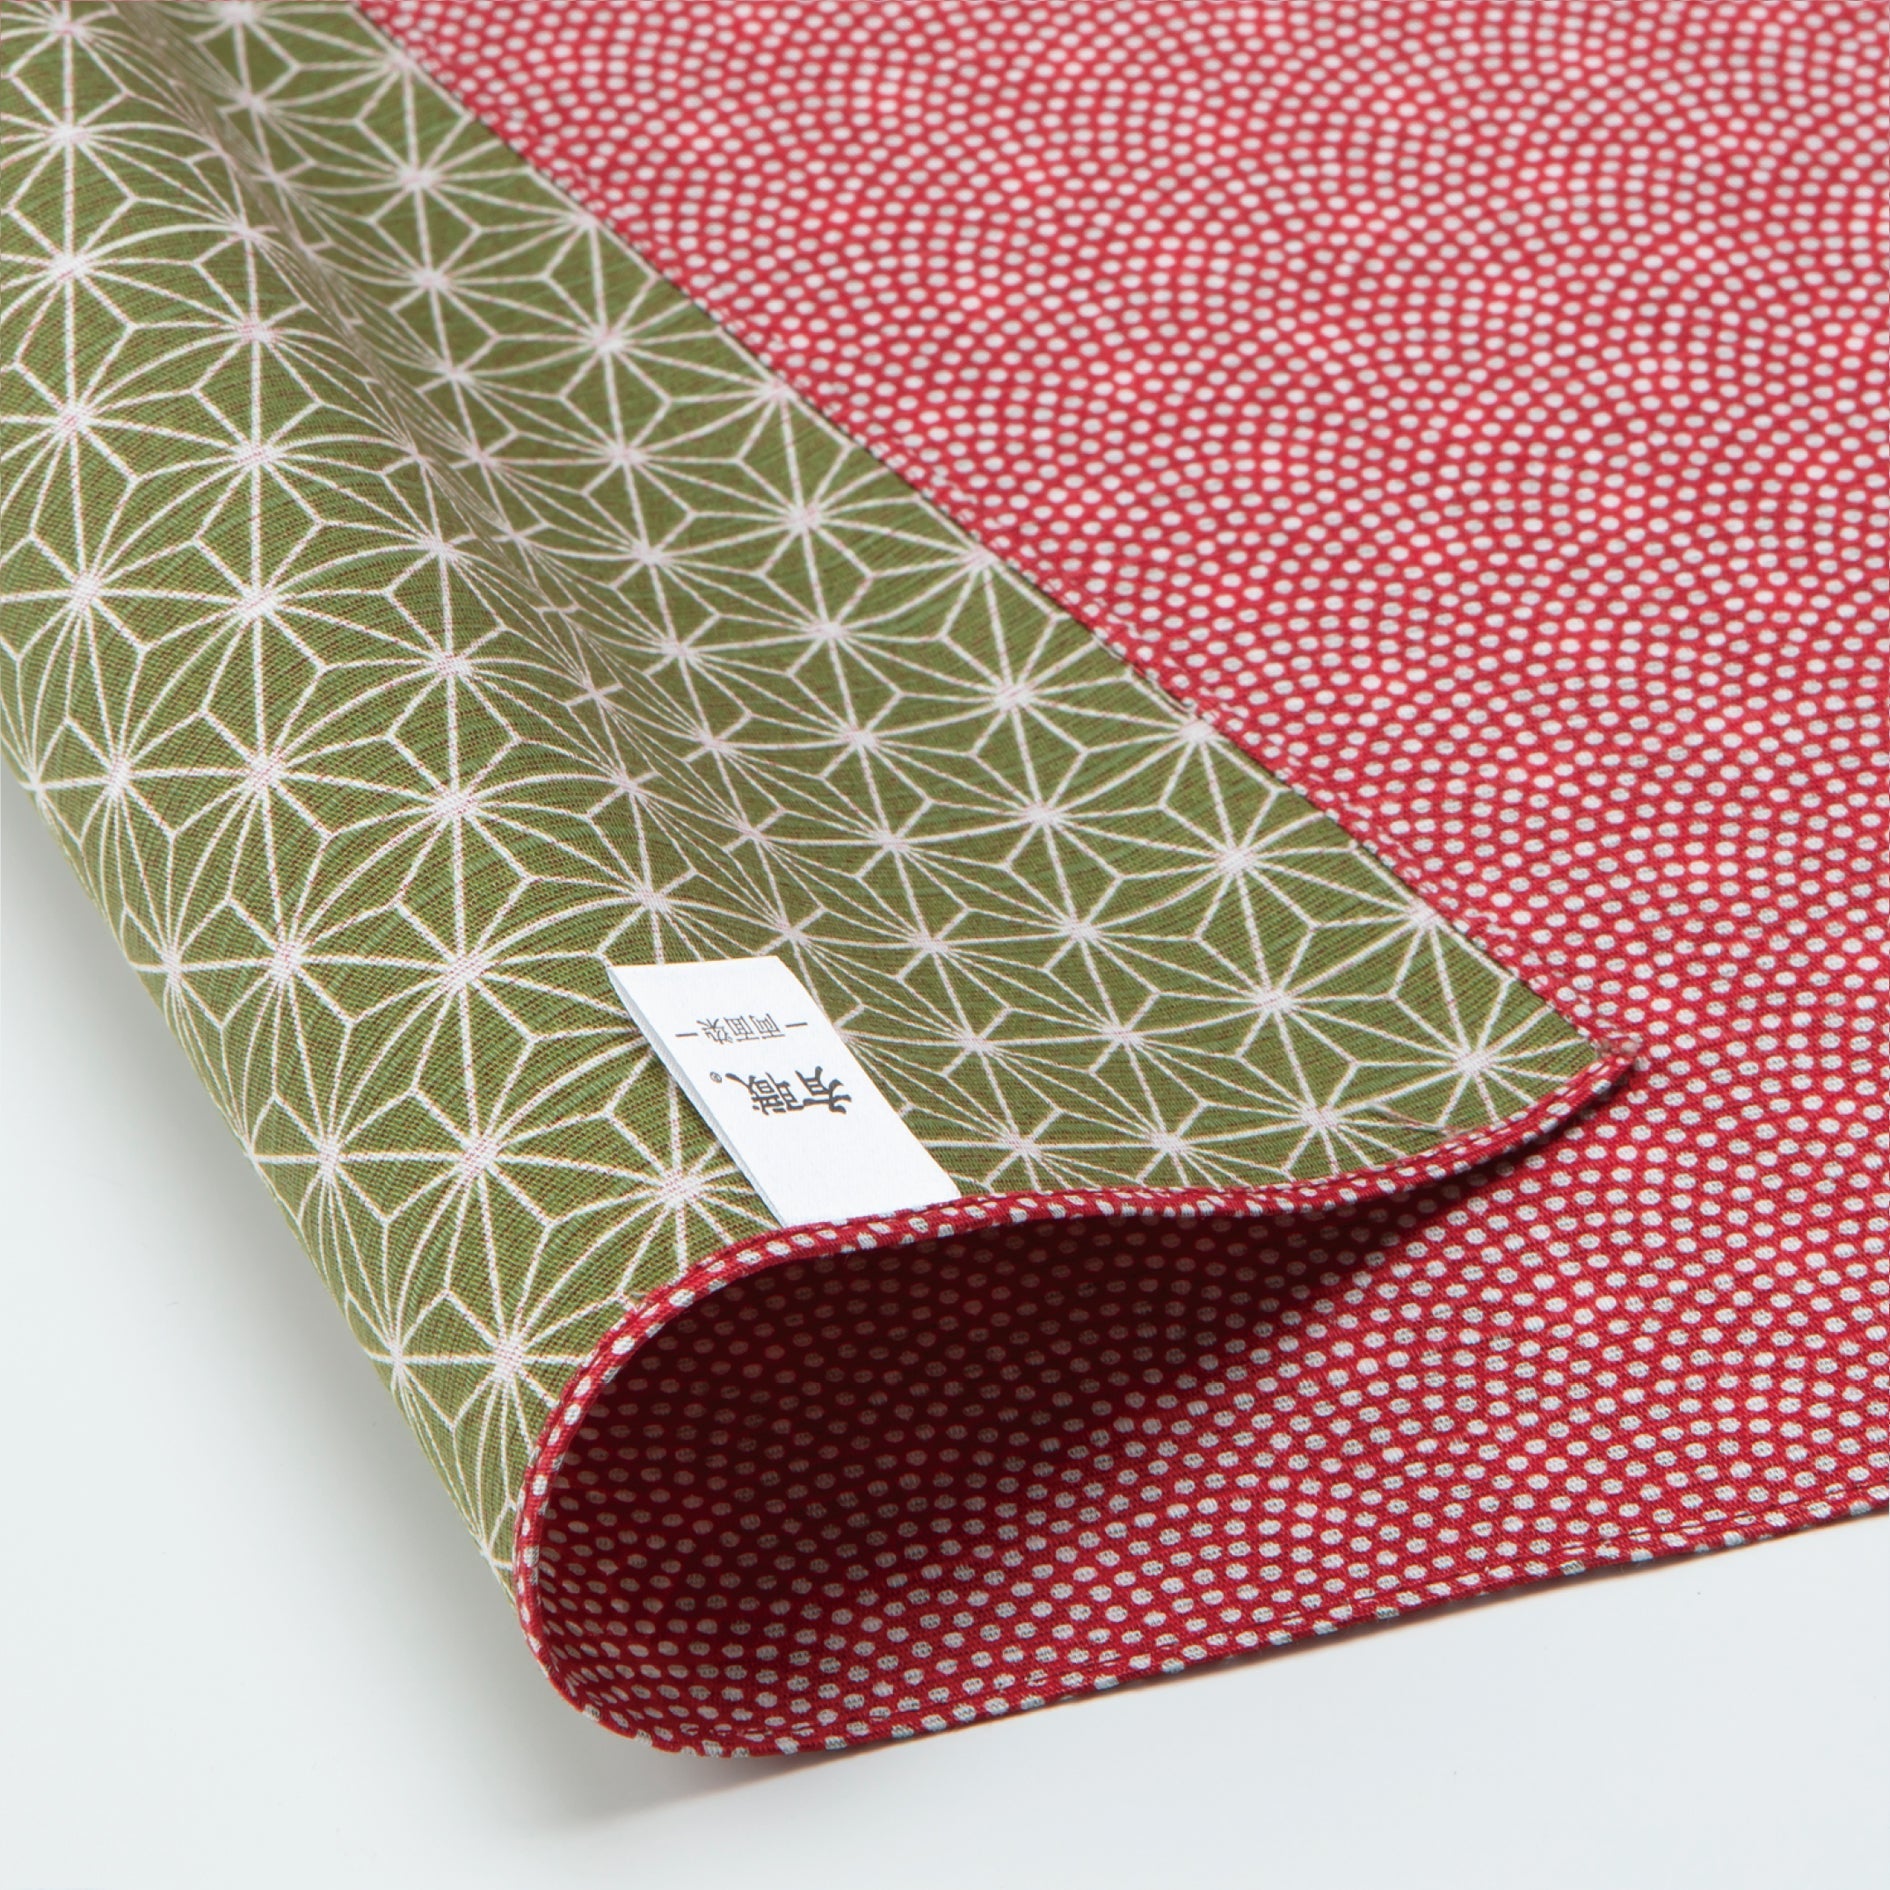 Double Sided Furoshiki Wrapping Cloth | Asanoha Nami Red & Green by Sanyo Shoji - Bento&co Japanese Bento Lunch Boxes and Kitchenware Specialists